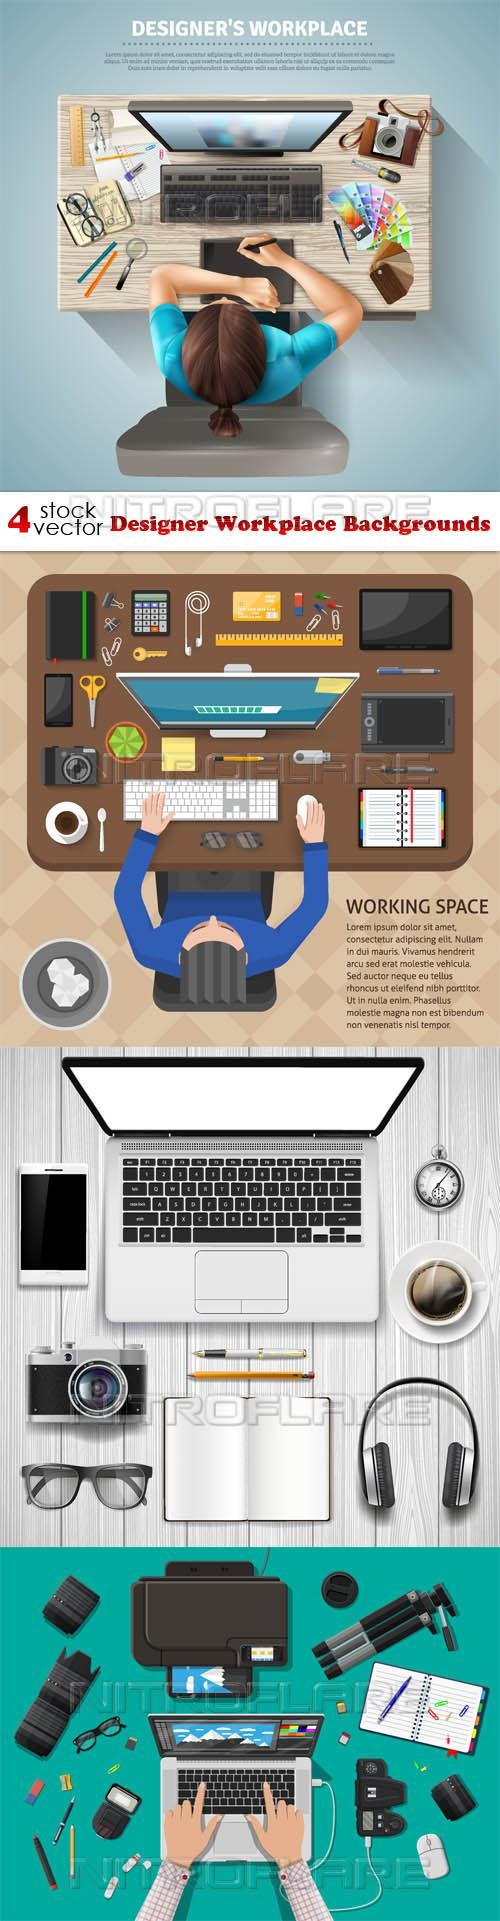 Designer Workplace Backgrounds ((aitff (8 files)